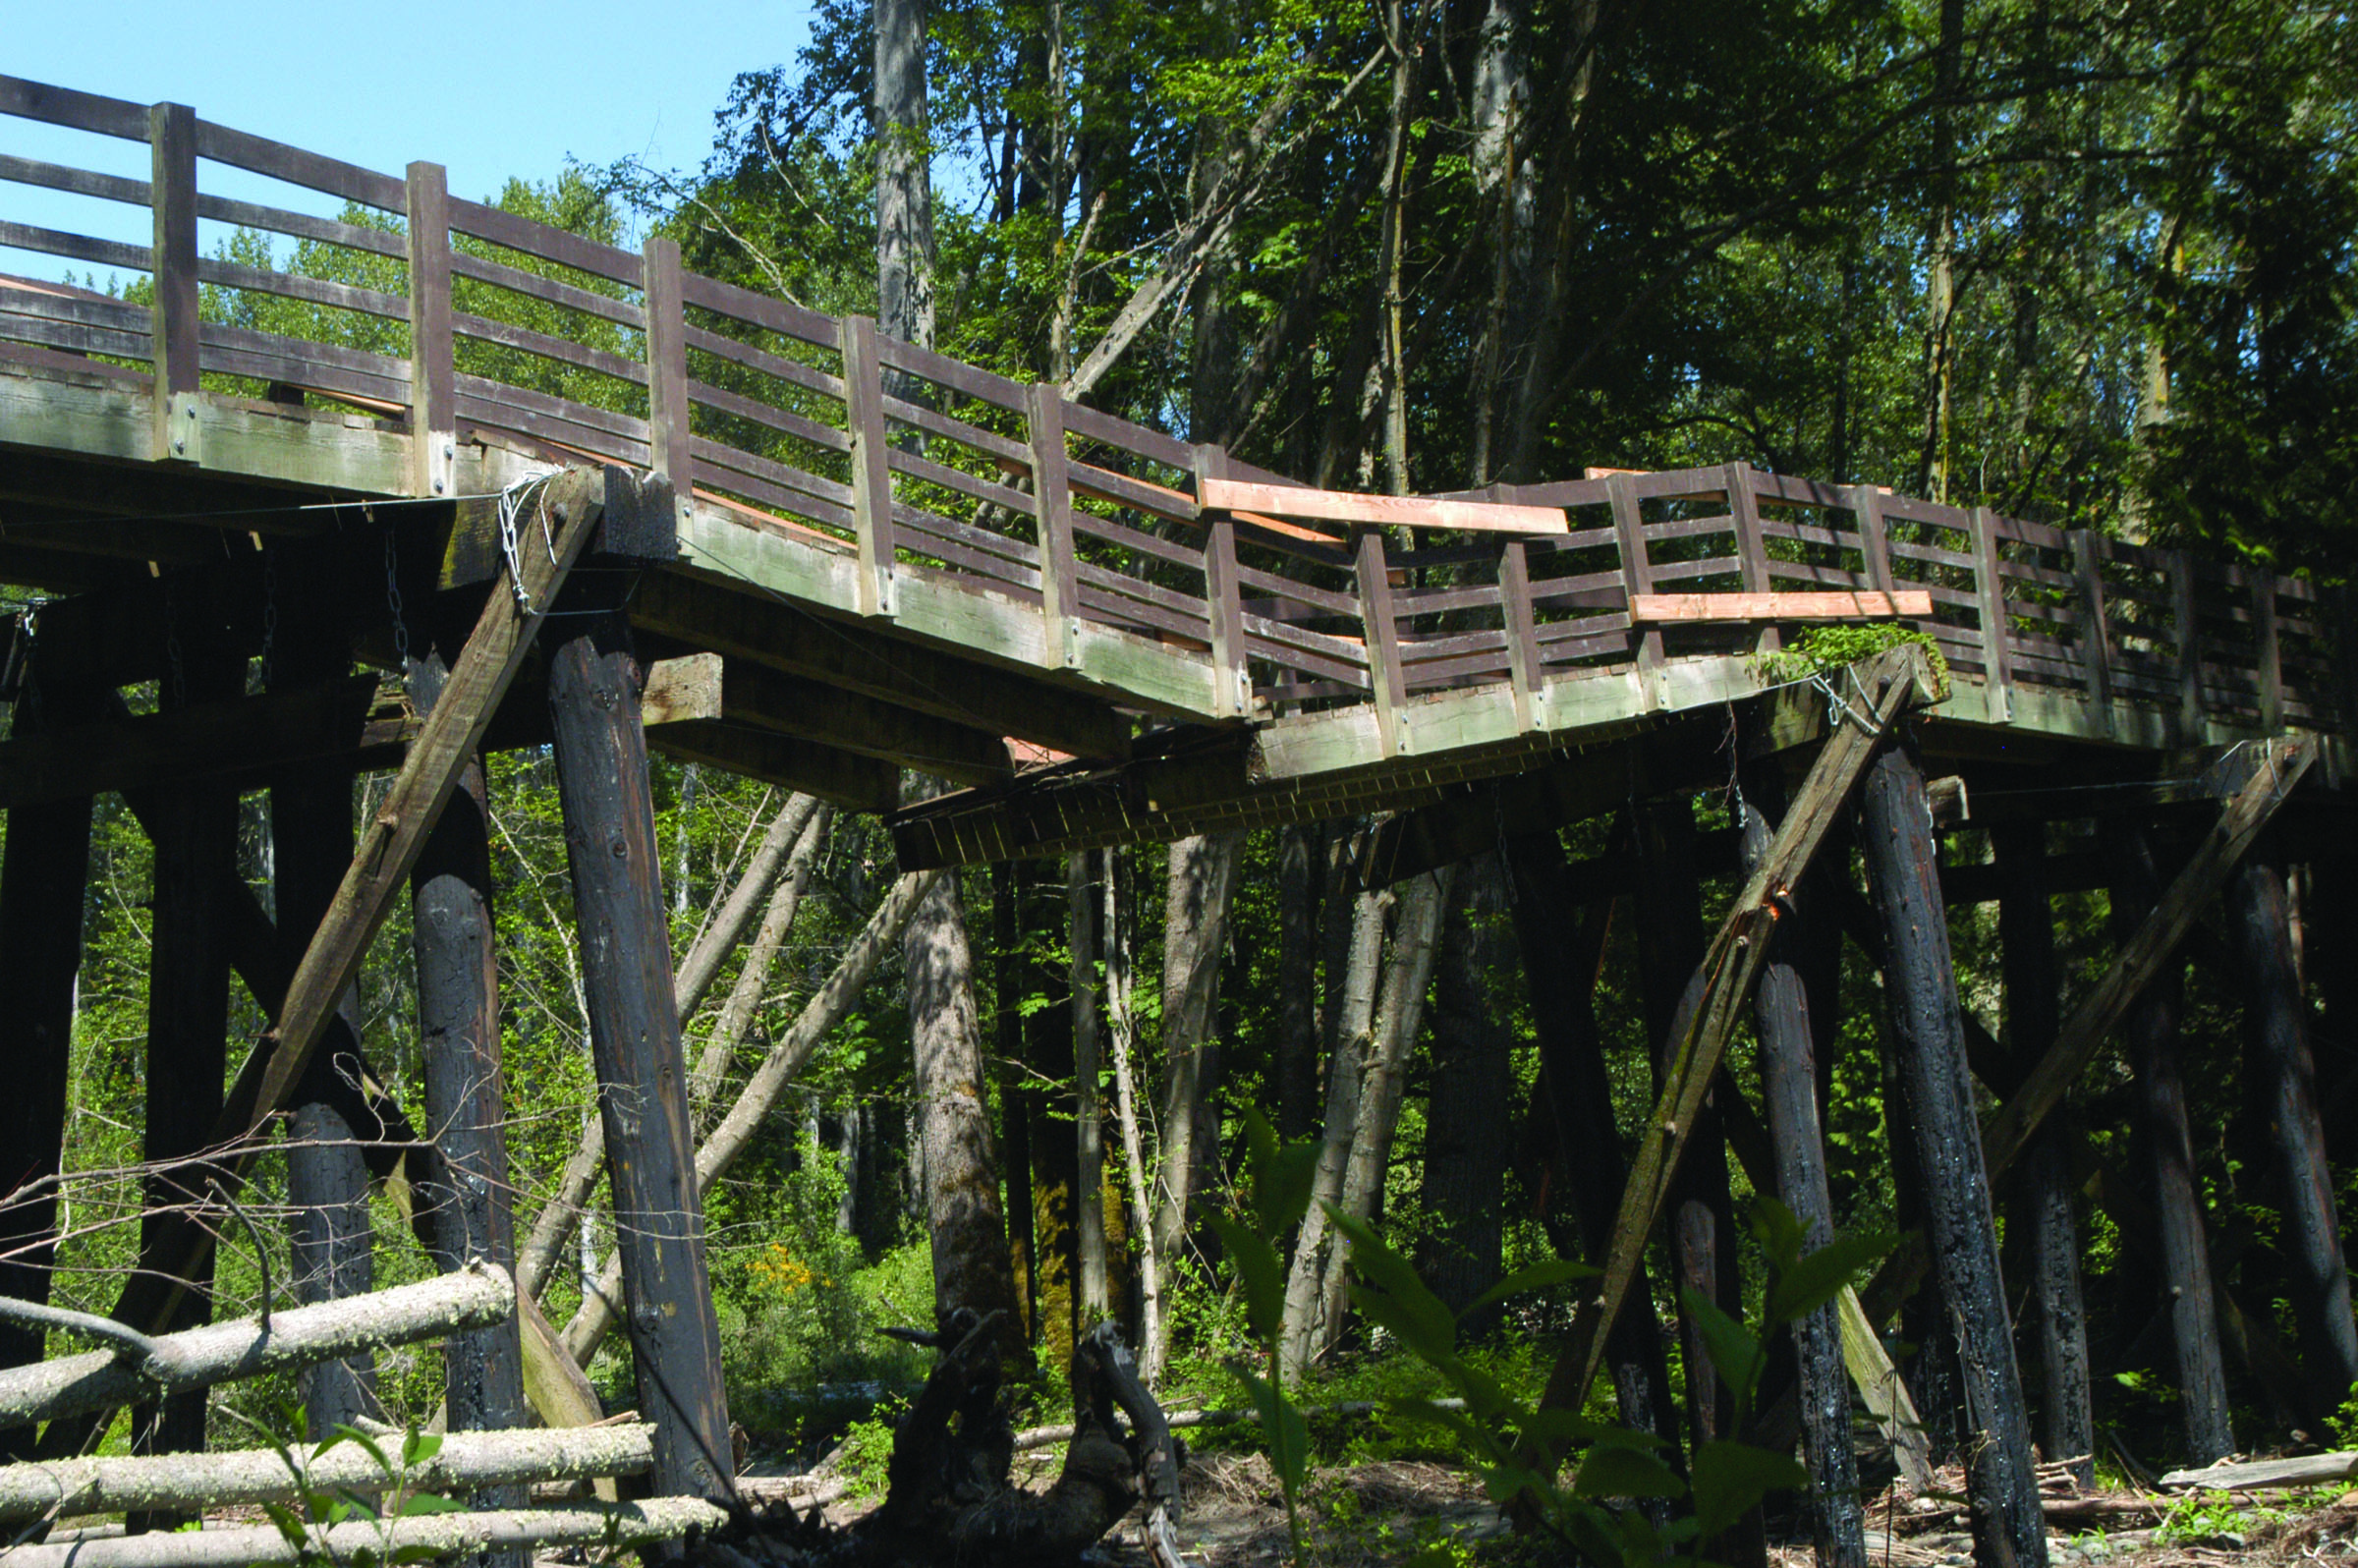 The Jamestown S'Klallam tribe is moving forward with plans to repair Railroad Bridge over the Dungeness River. (Chris McDaniel/Peninsula Daily News)